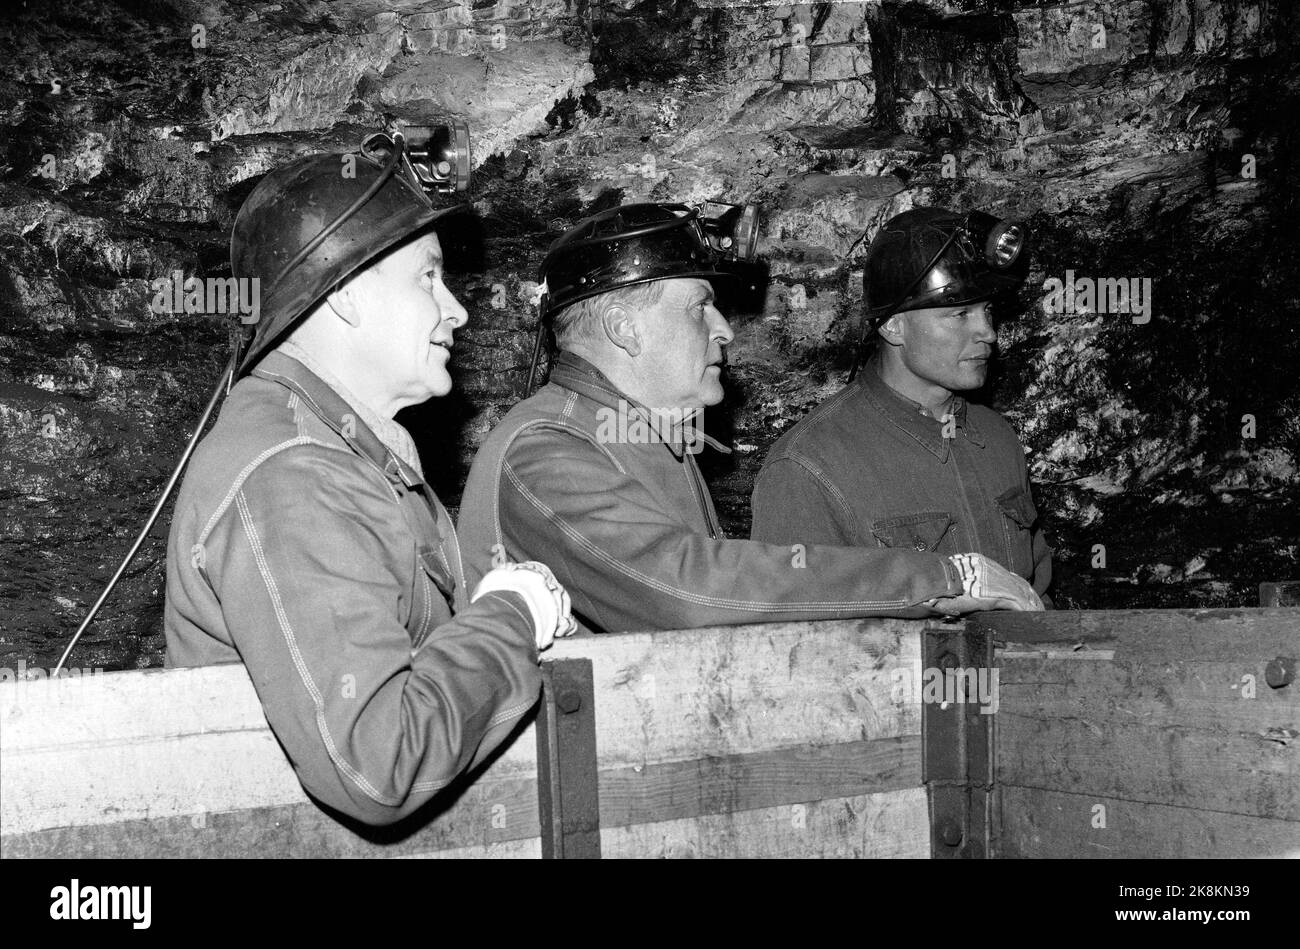 Svalbard August 1961 King Olav visits Svalbard. Here the king is on his way into a mine, in full mining equipment, with helmet and overalls. Olav in the middle, in profile. Photo: NTB / NTB Stock Photo